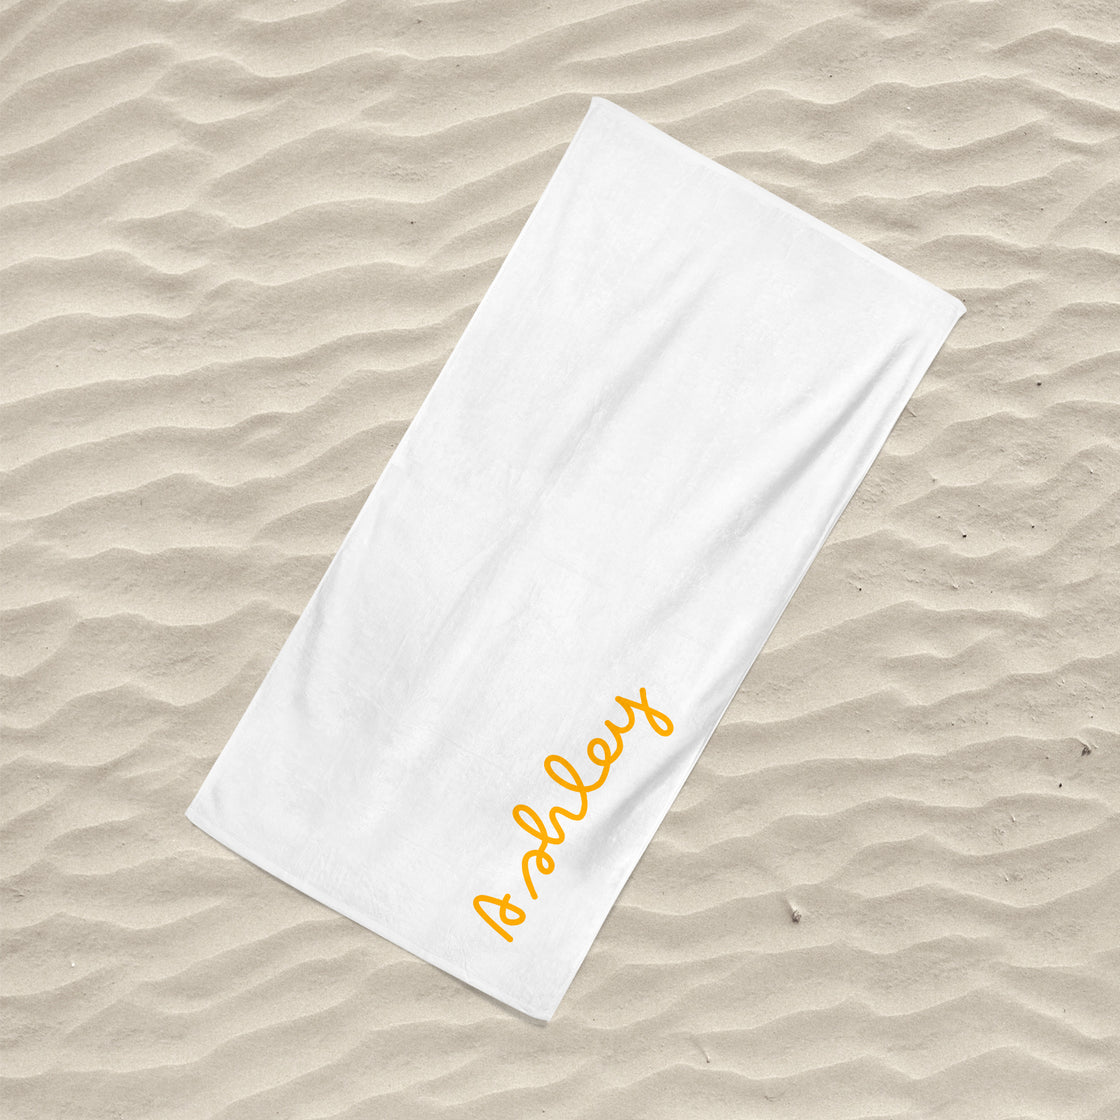 Island Inspired Beach Towel Orange on White - Personalise with Name